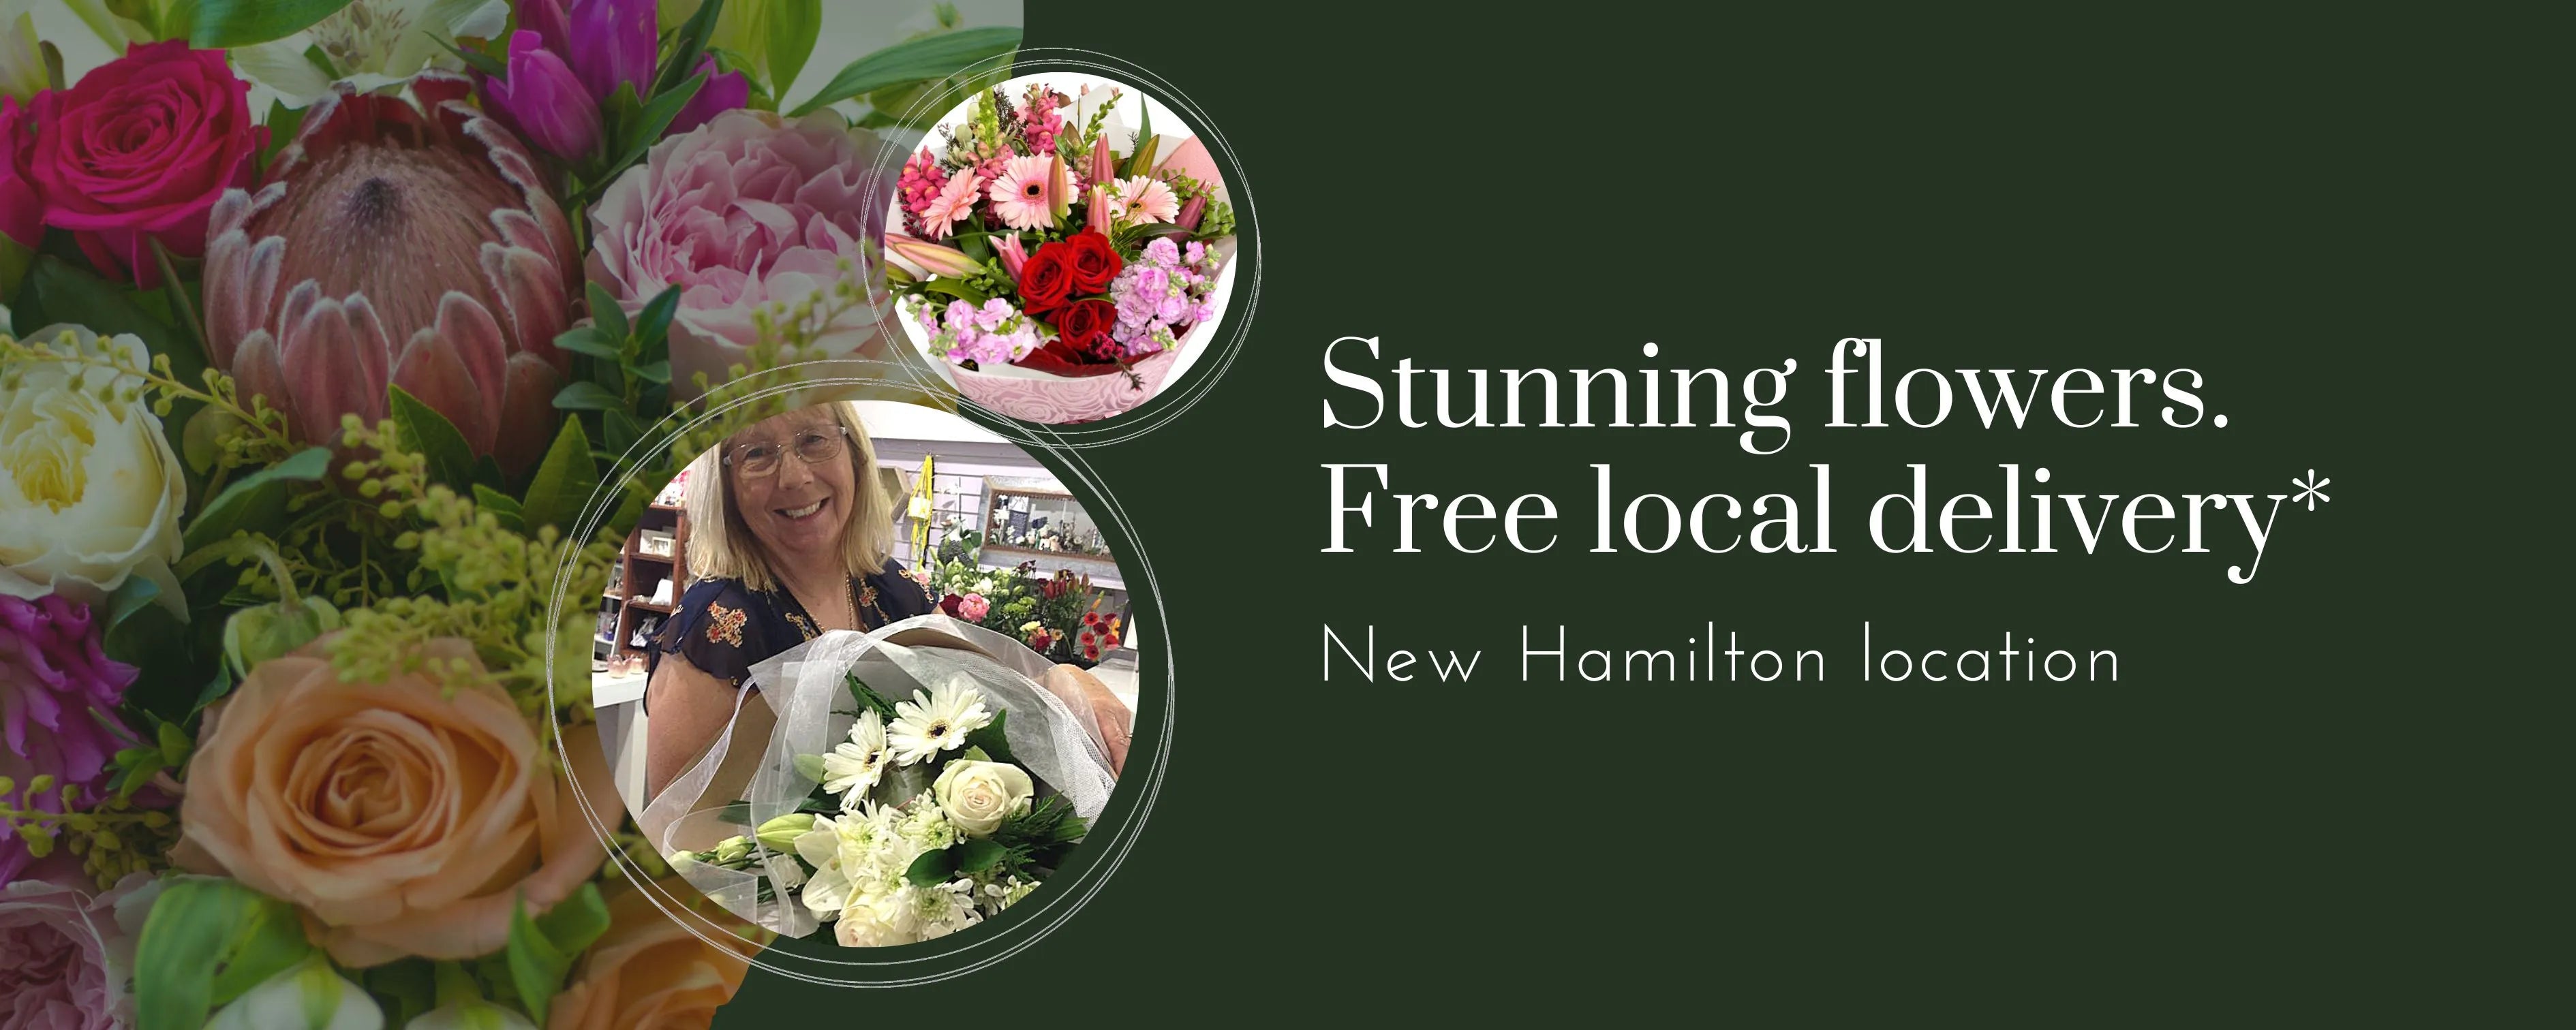 12 Preserved Red Roses in a Box Official Local Florist: Hamilton